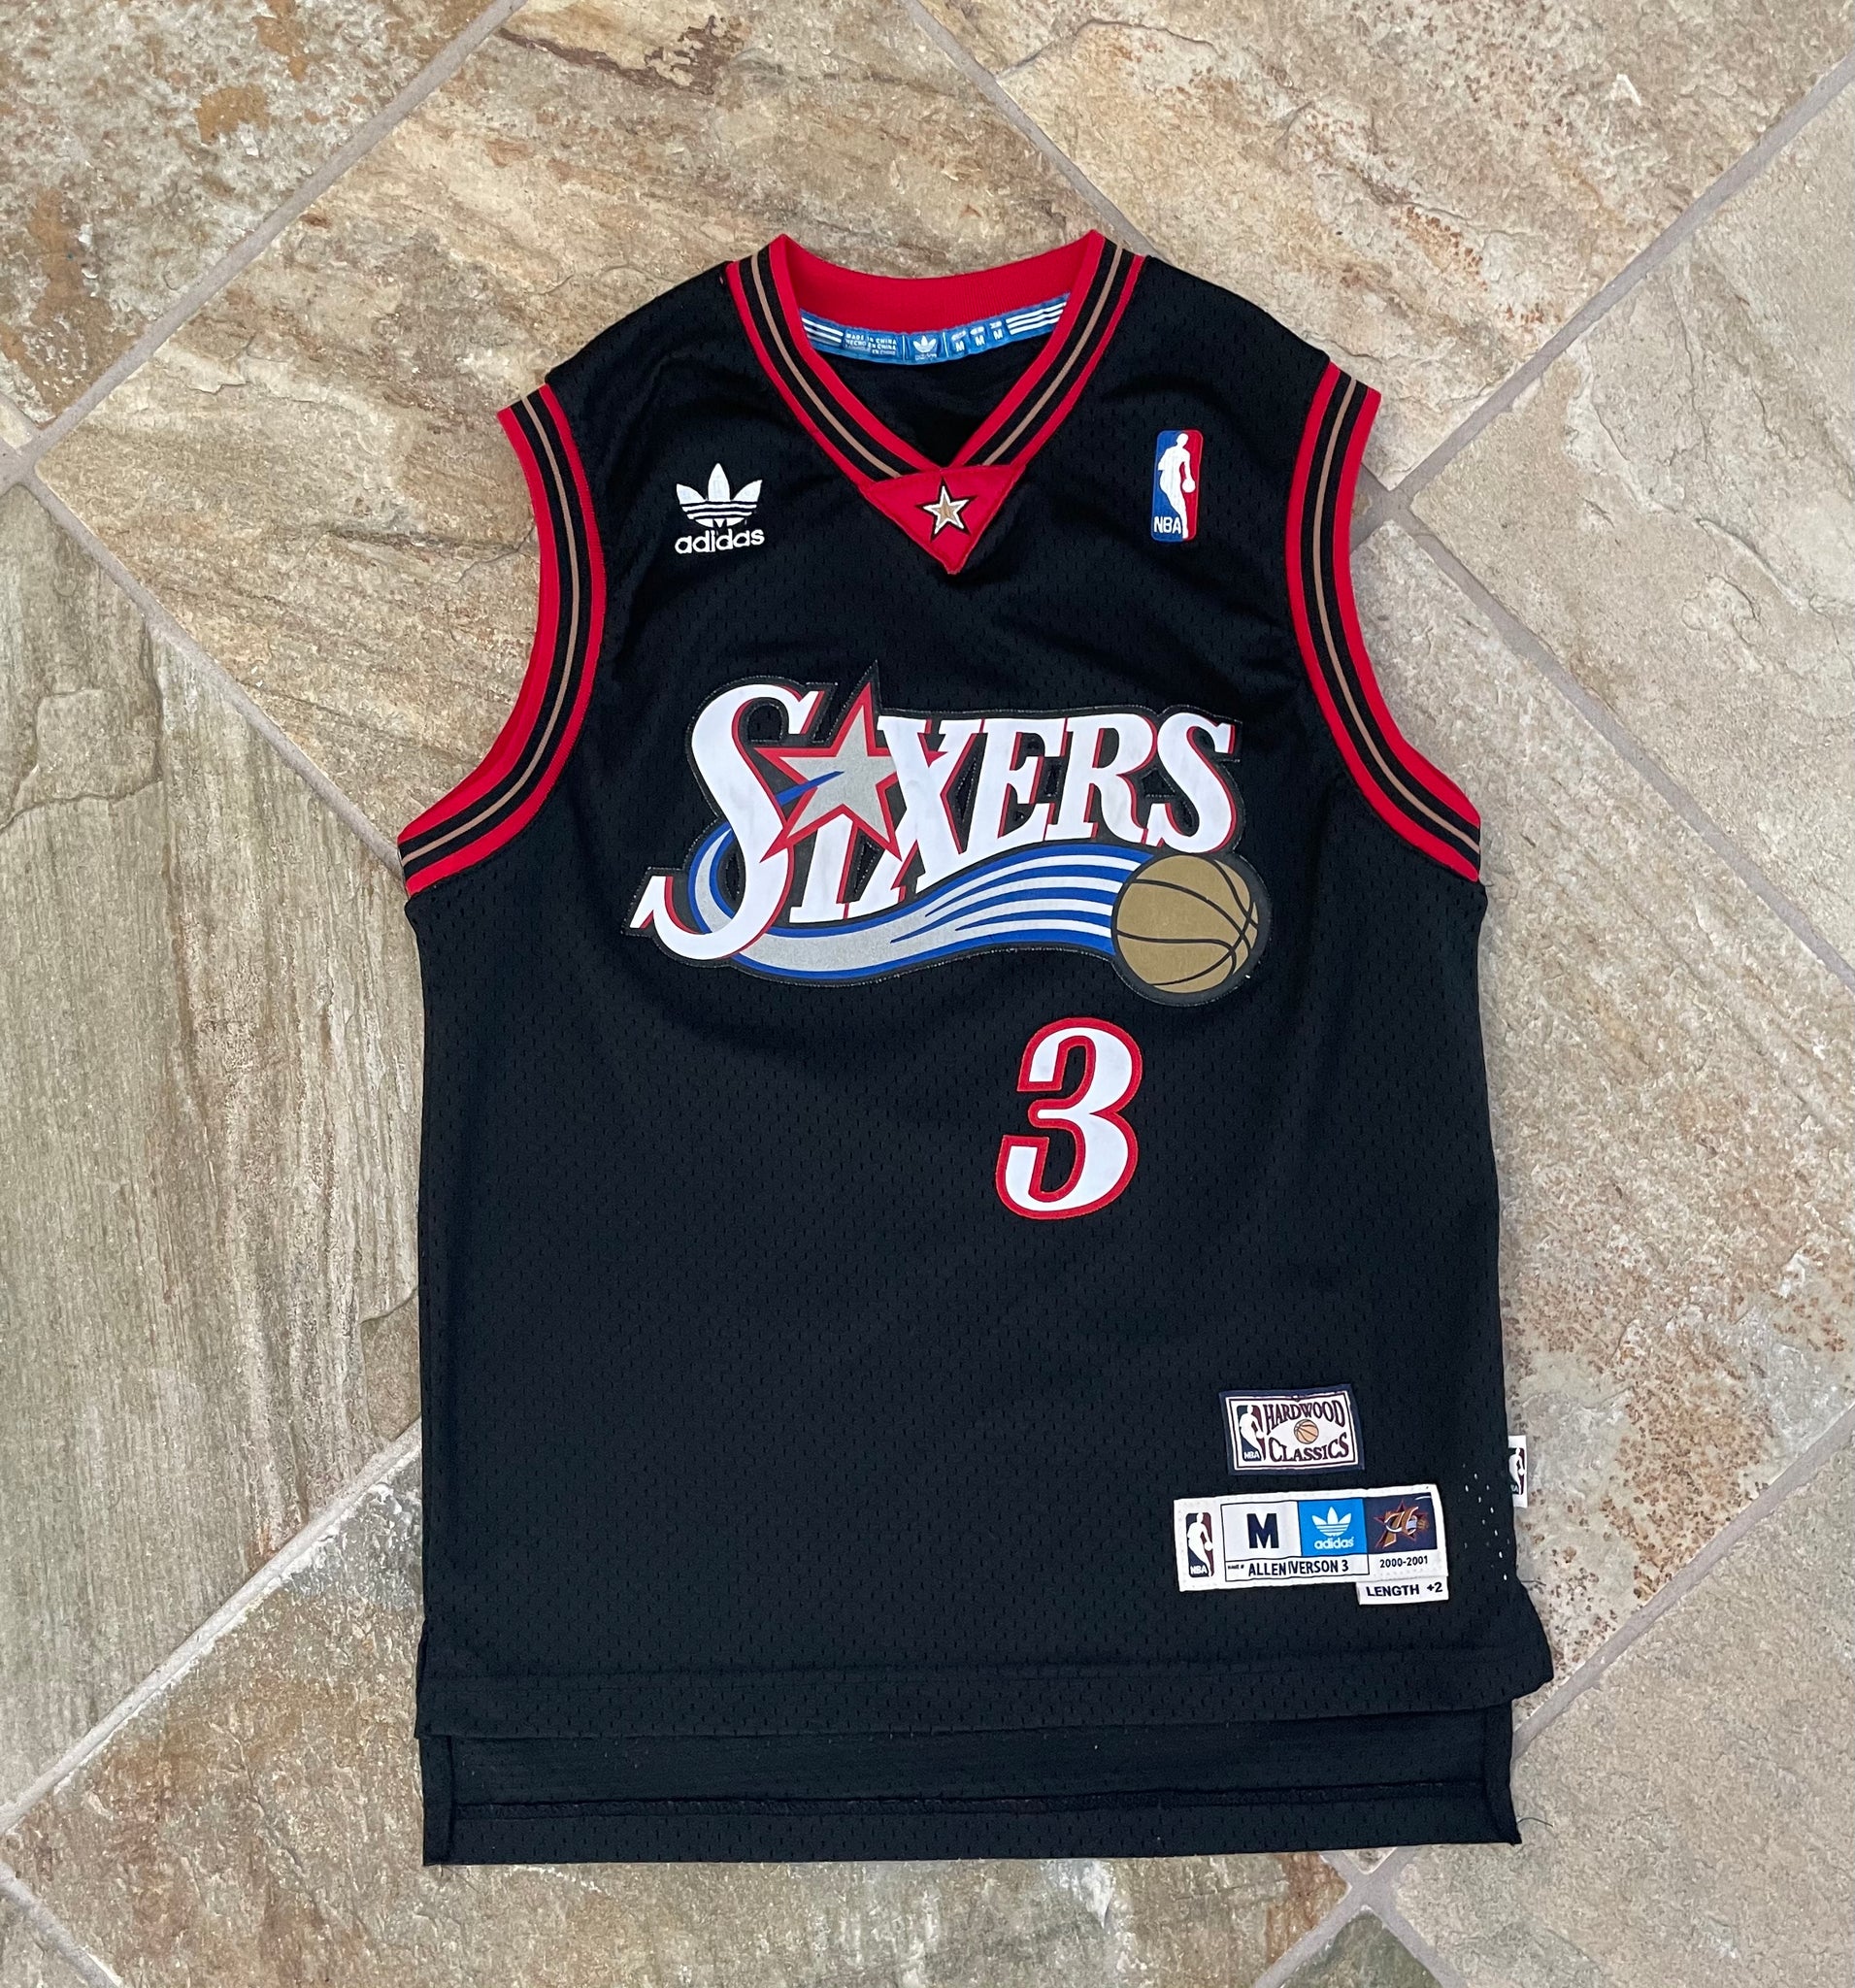 76ers 90s jersey